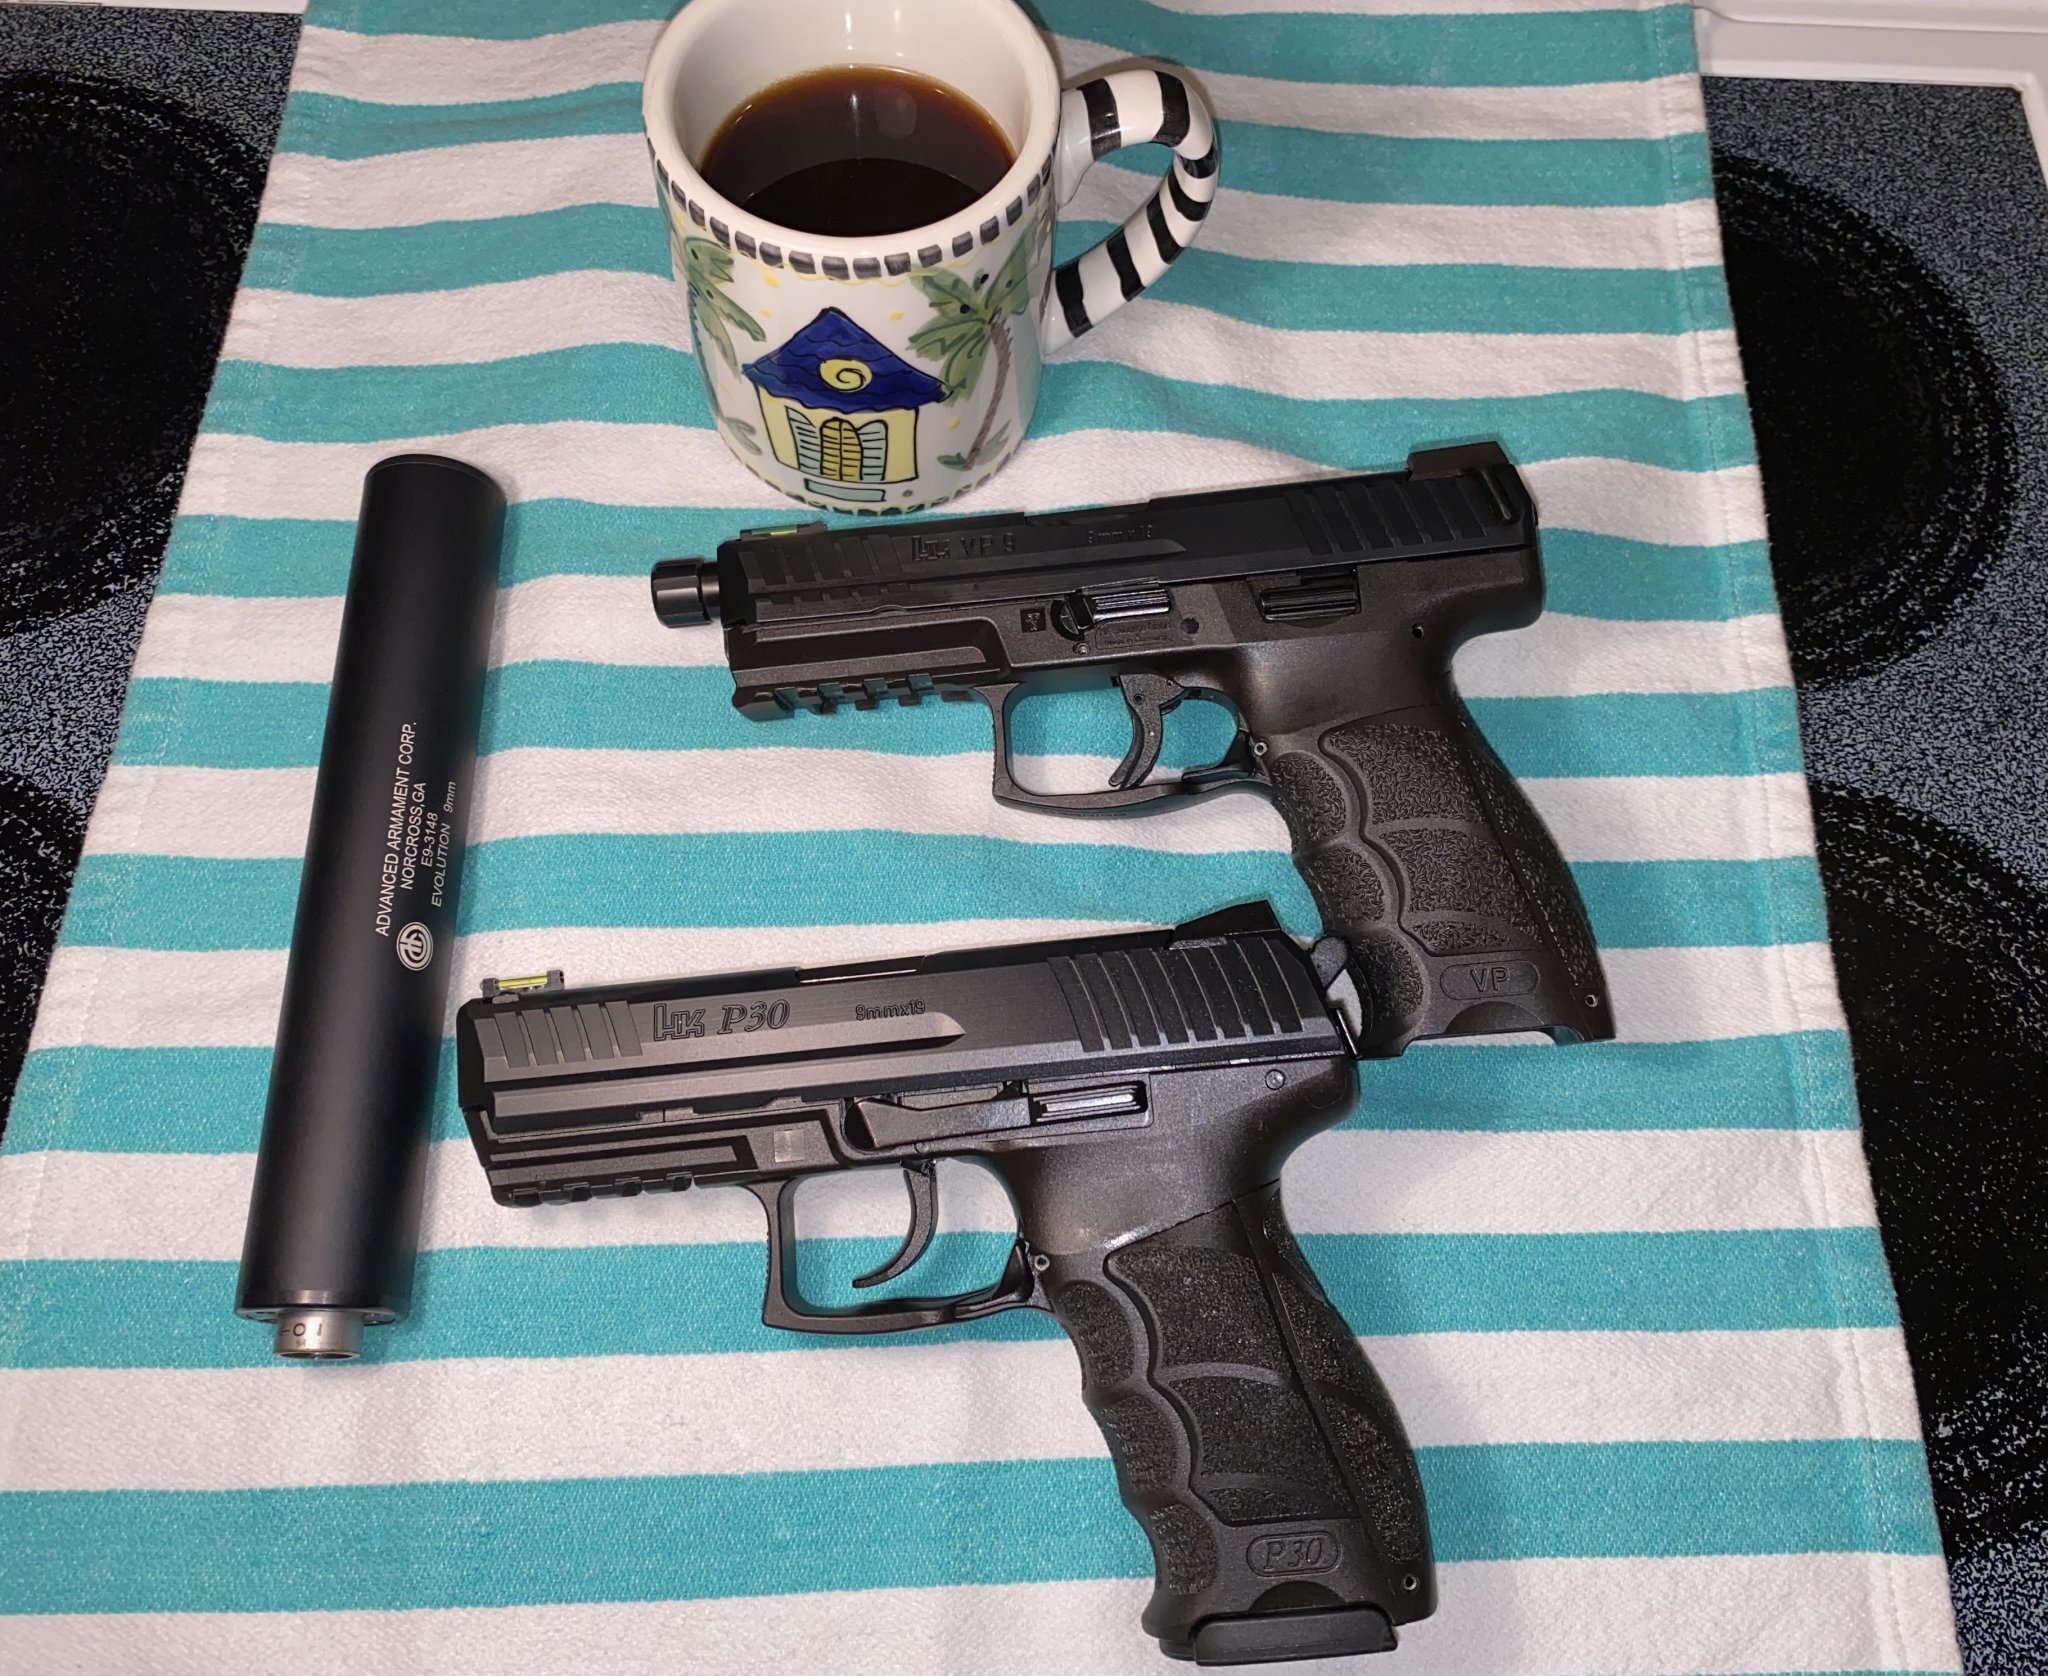 HK p30 VP9 Compact - USP .45 Tactical  Sig P229 Derivatives with Coffee Photos 2020IMG_7190 copy.jpg